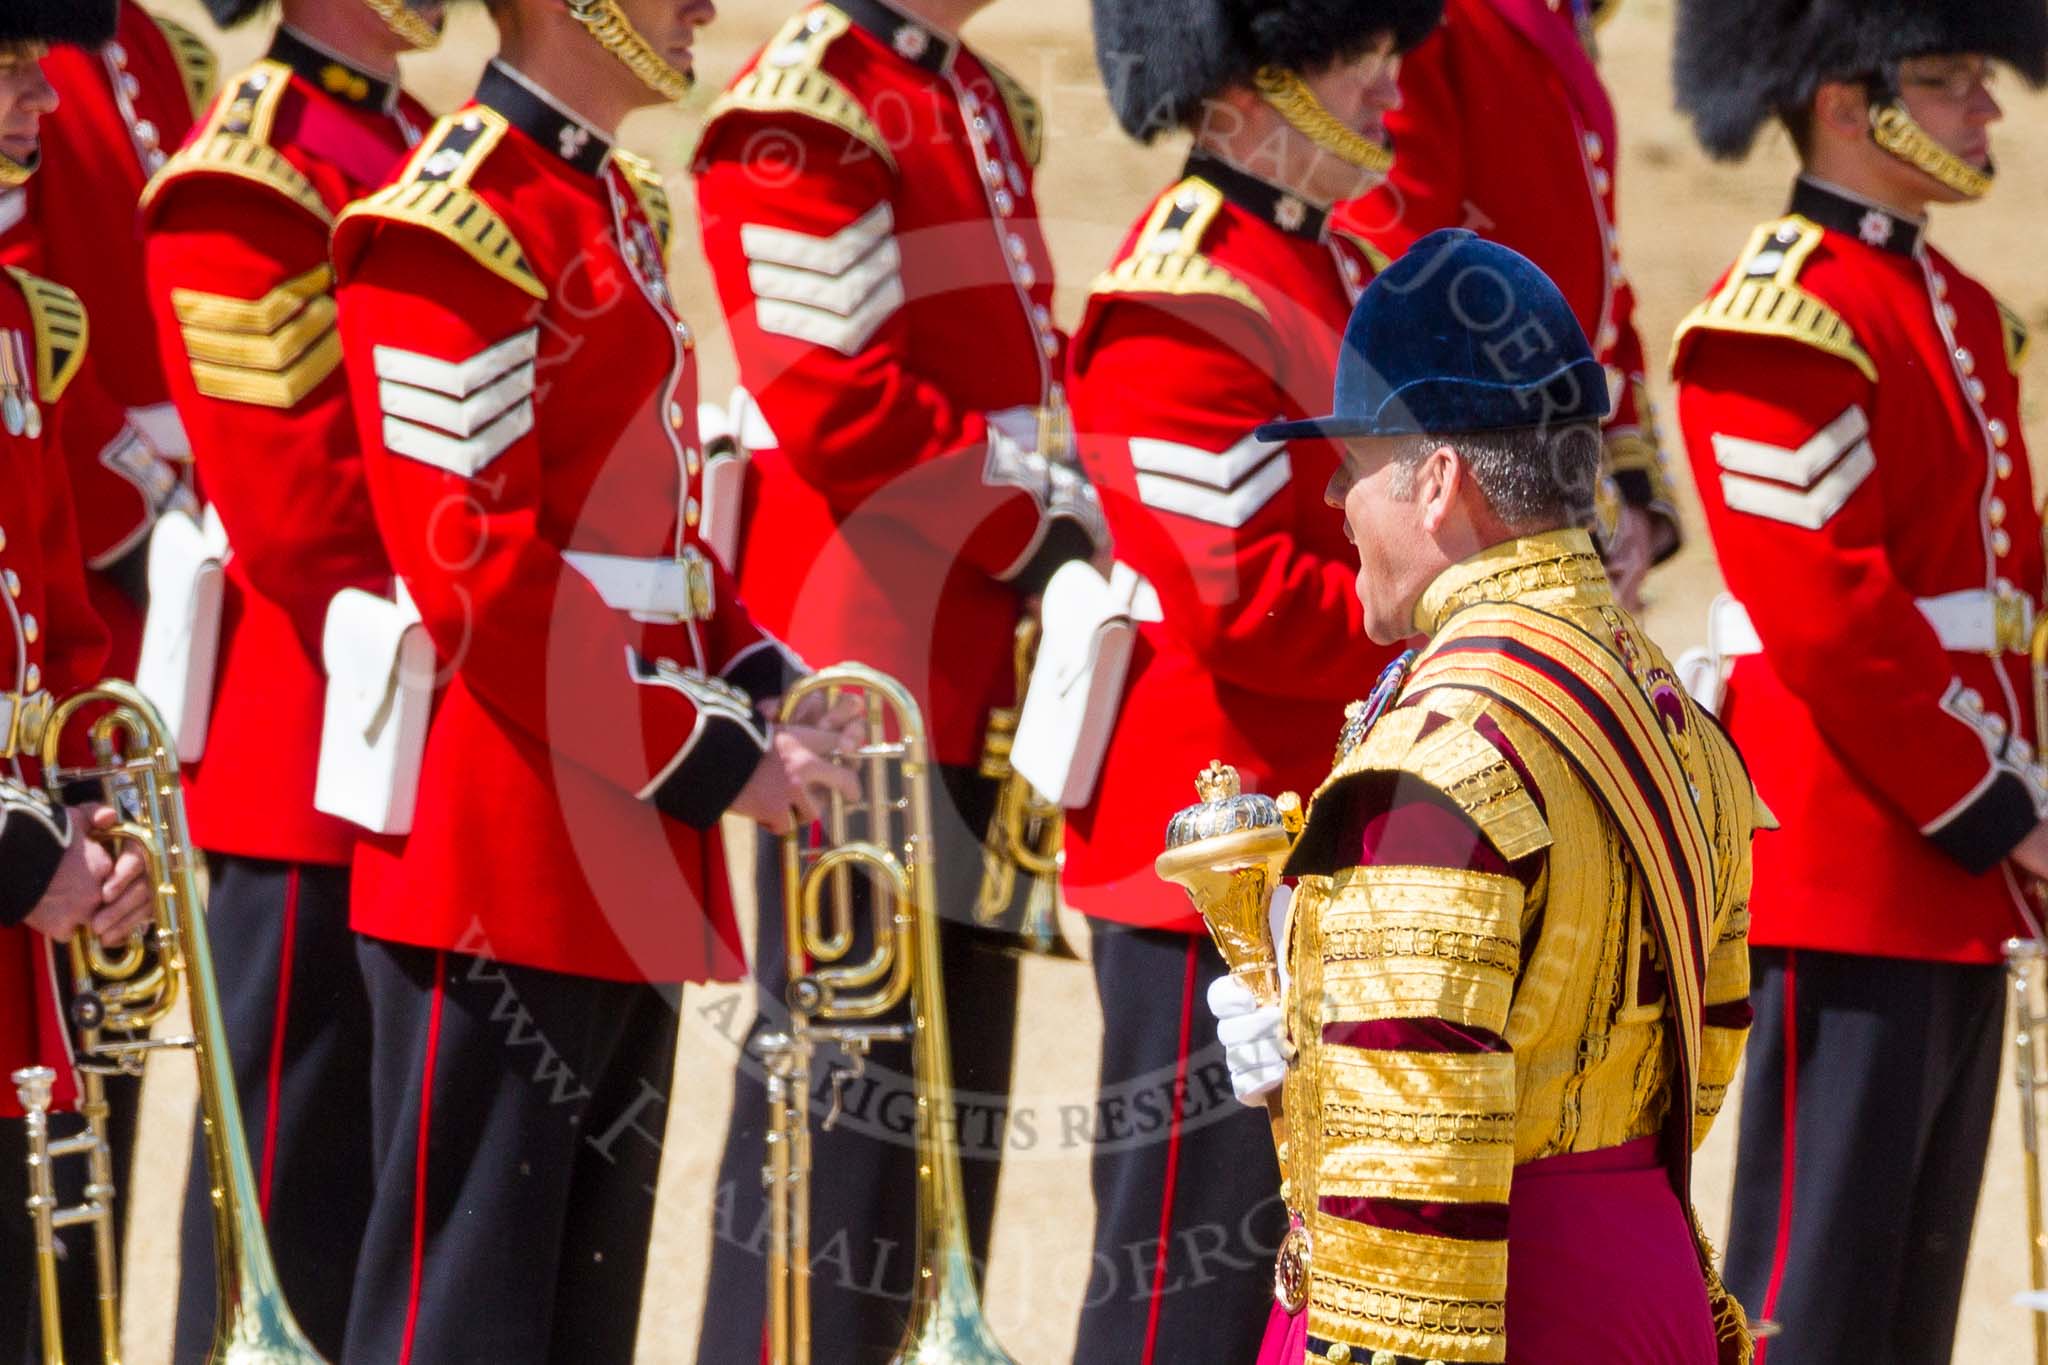 The Colonel's Review 2015.
Horse Guards Parade, Westminster,
London,

United Kingdom,
on 06 June 2015 at 10:33, image #98